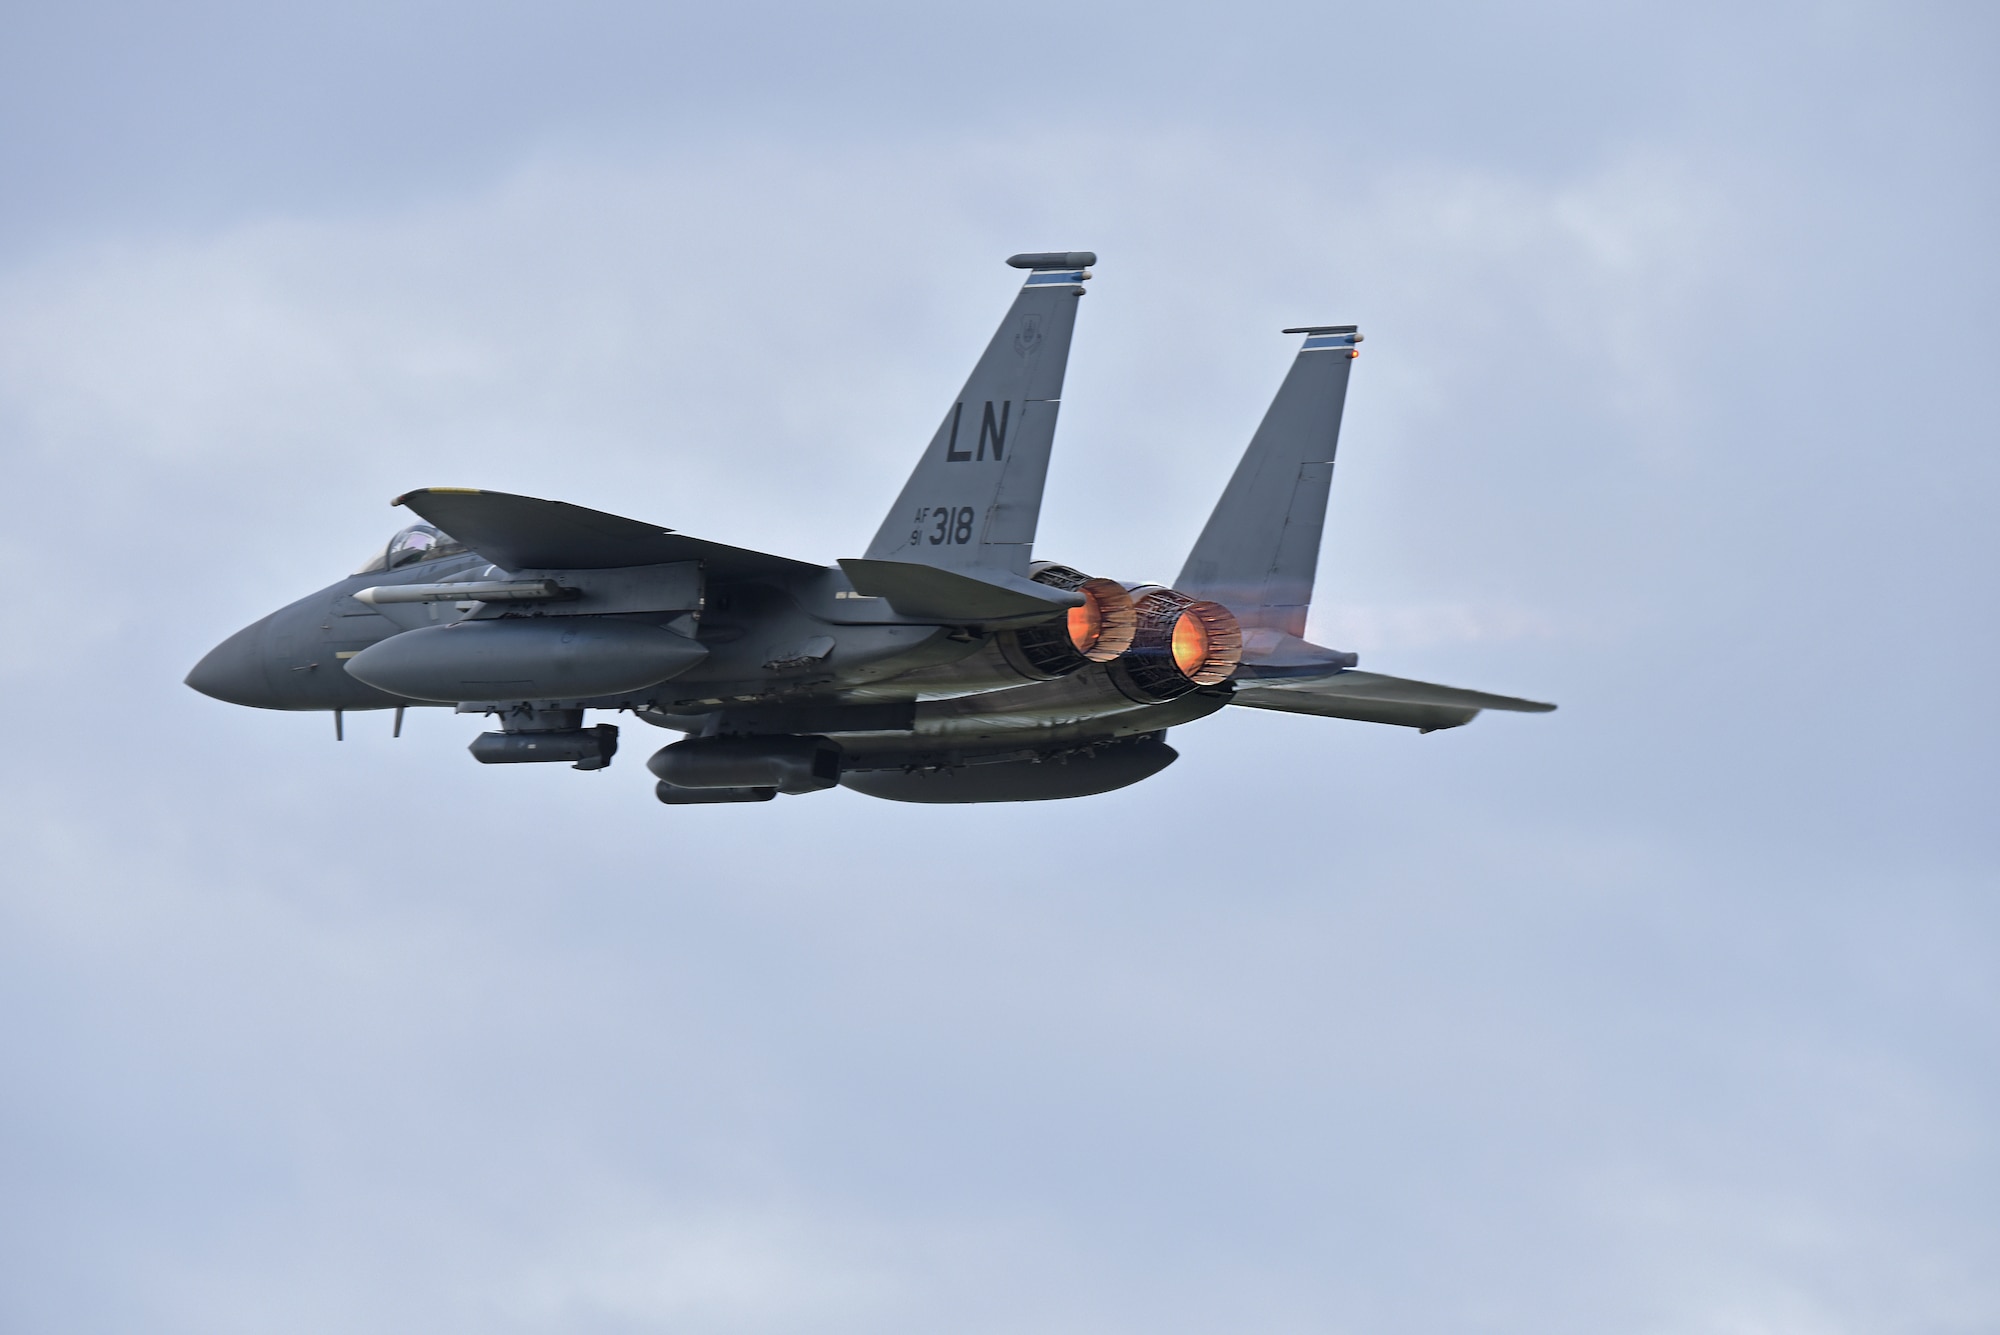 An F-15E Strike Eagle assigned to the 492nd Fighter Squadron takes off at Royal Air Force Lakenheath, England, July 23, 2020. To maintain proficiency, Liberty Wing aircrew perform daily training missions ensuring they are always ready to provide worldwide responsive combat airpower. (U.S. Air Force photo by Airman 1st Class Rhonda Smith)